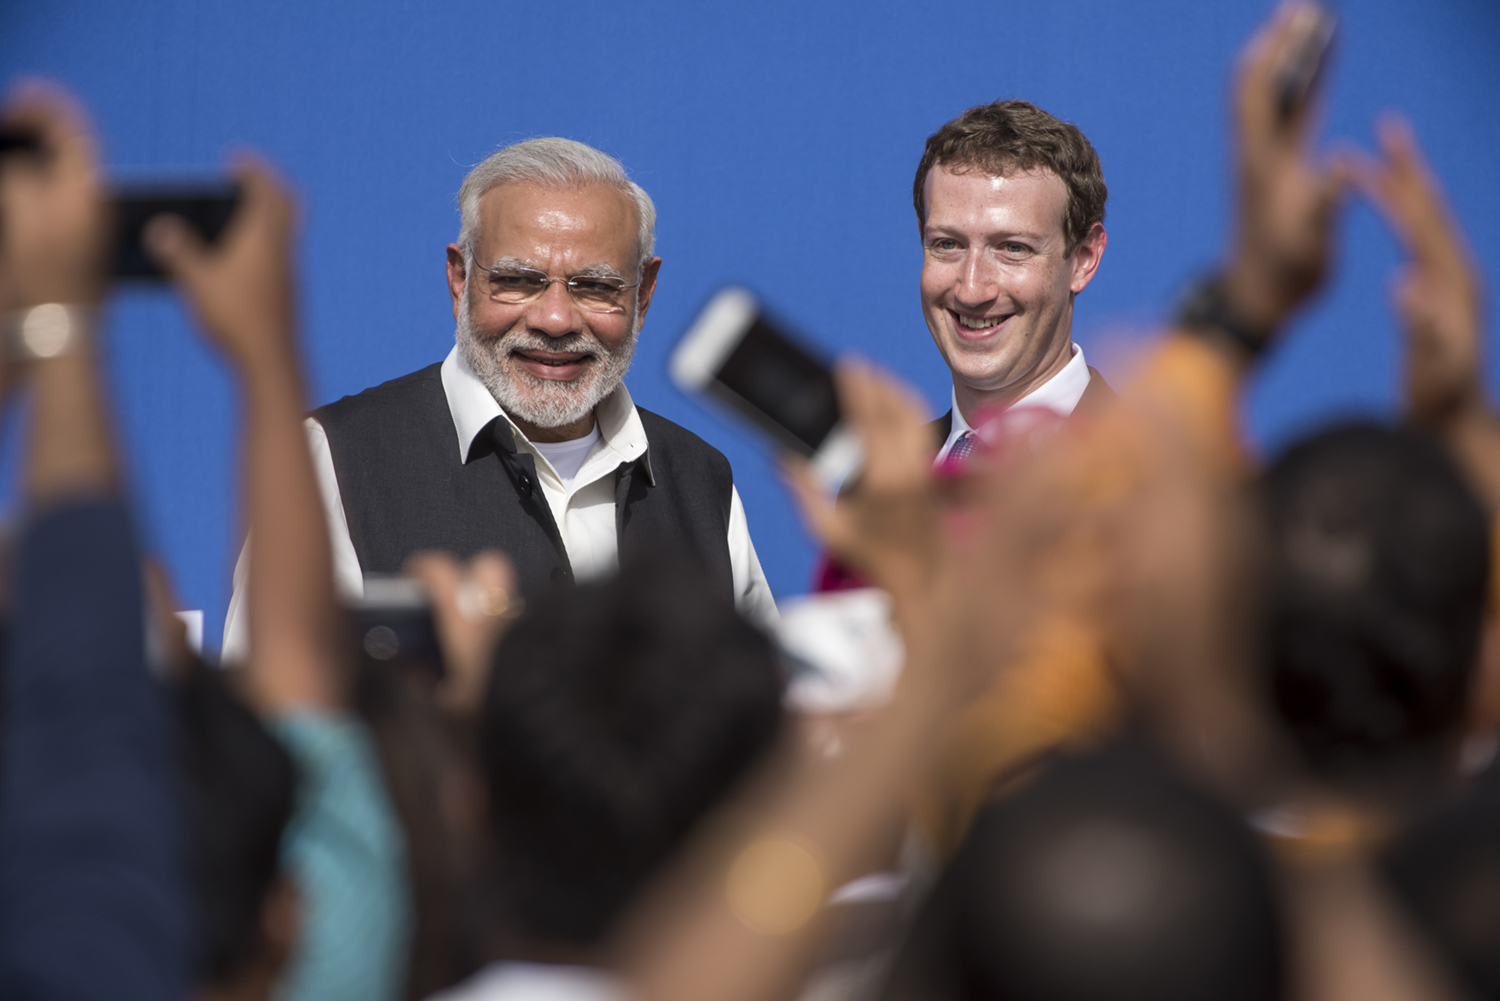 From the Bhopal gas tragedy to Facebook and Bloomsbury, a history of corporate culpability